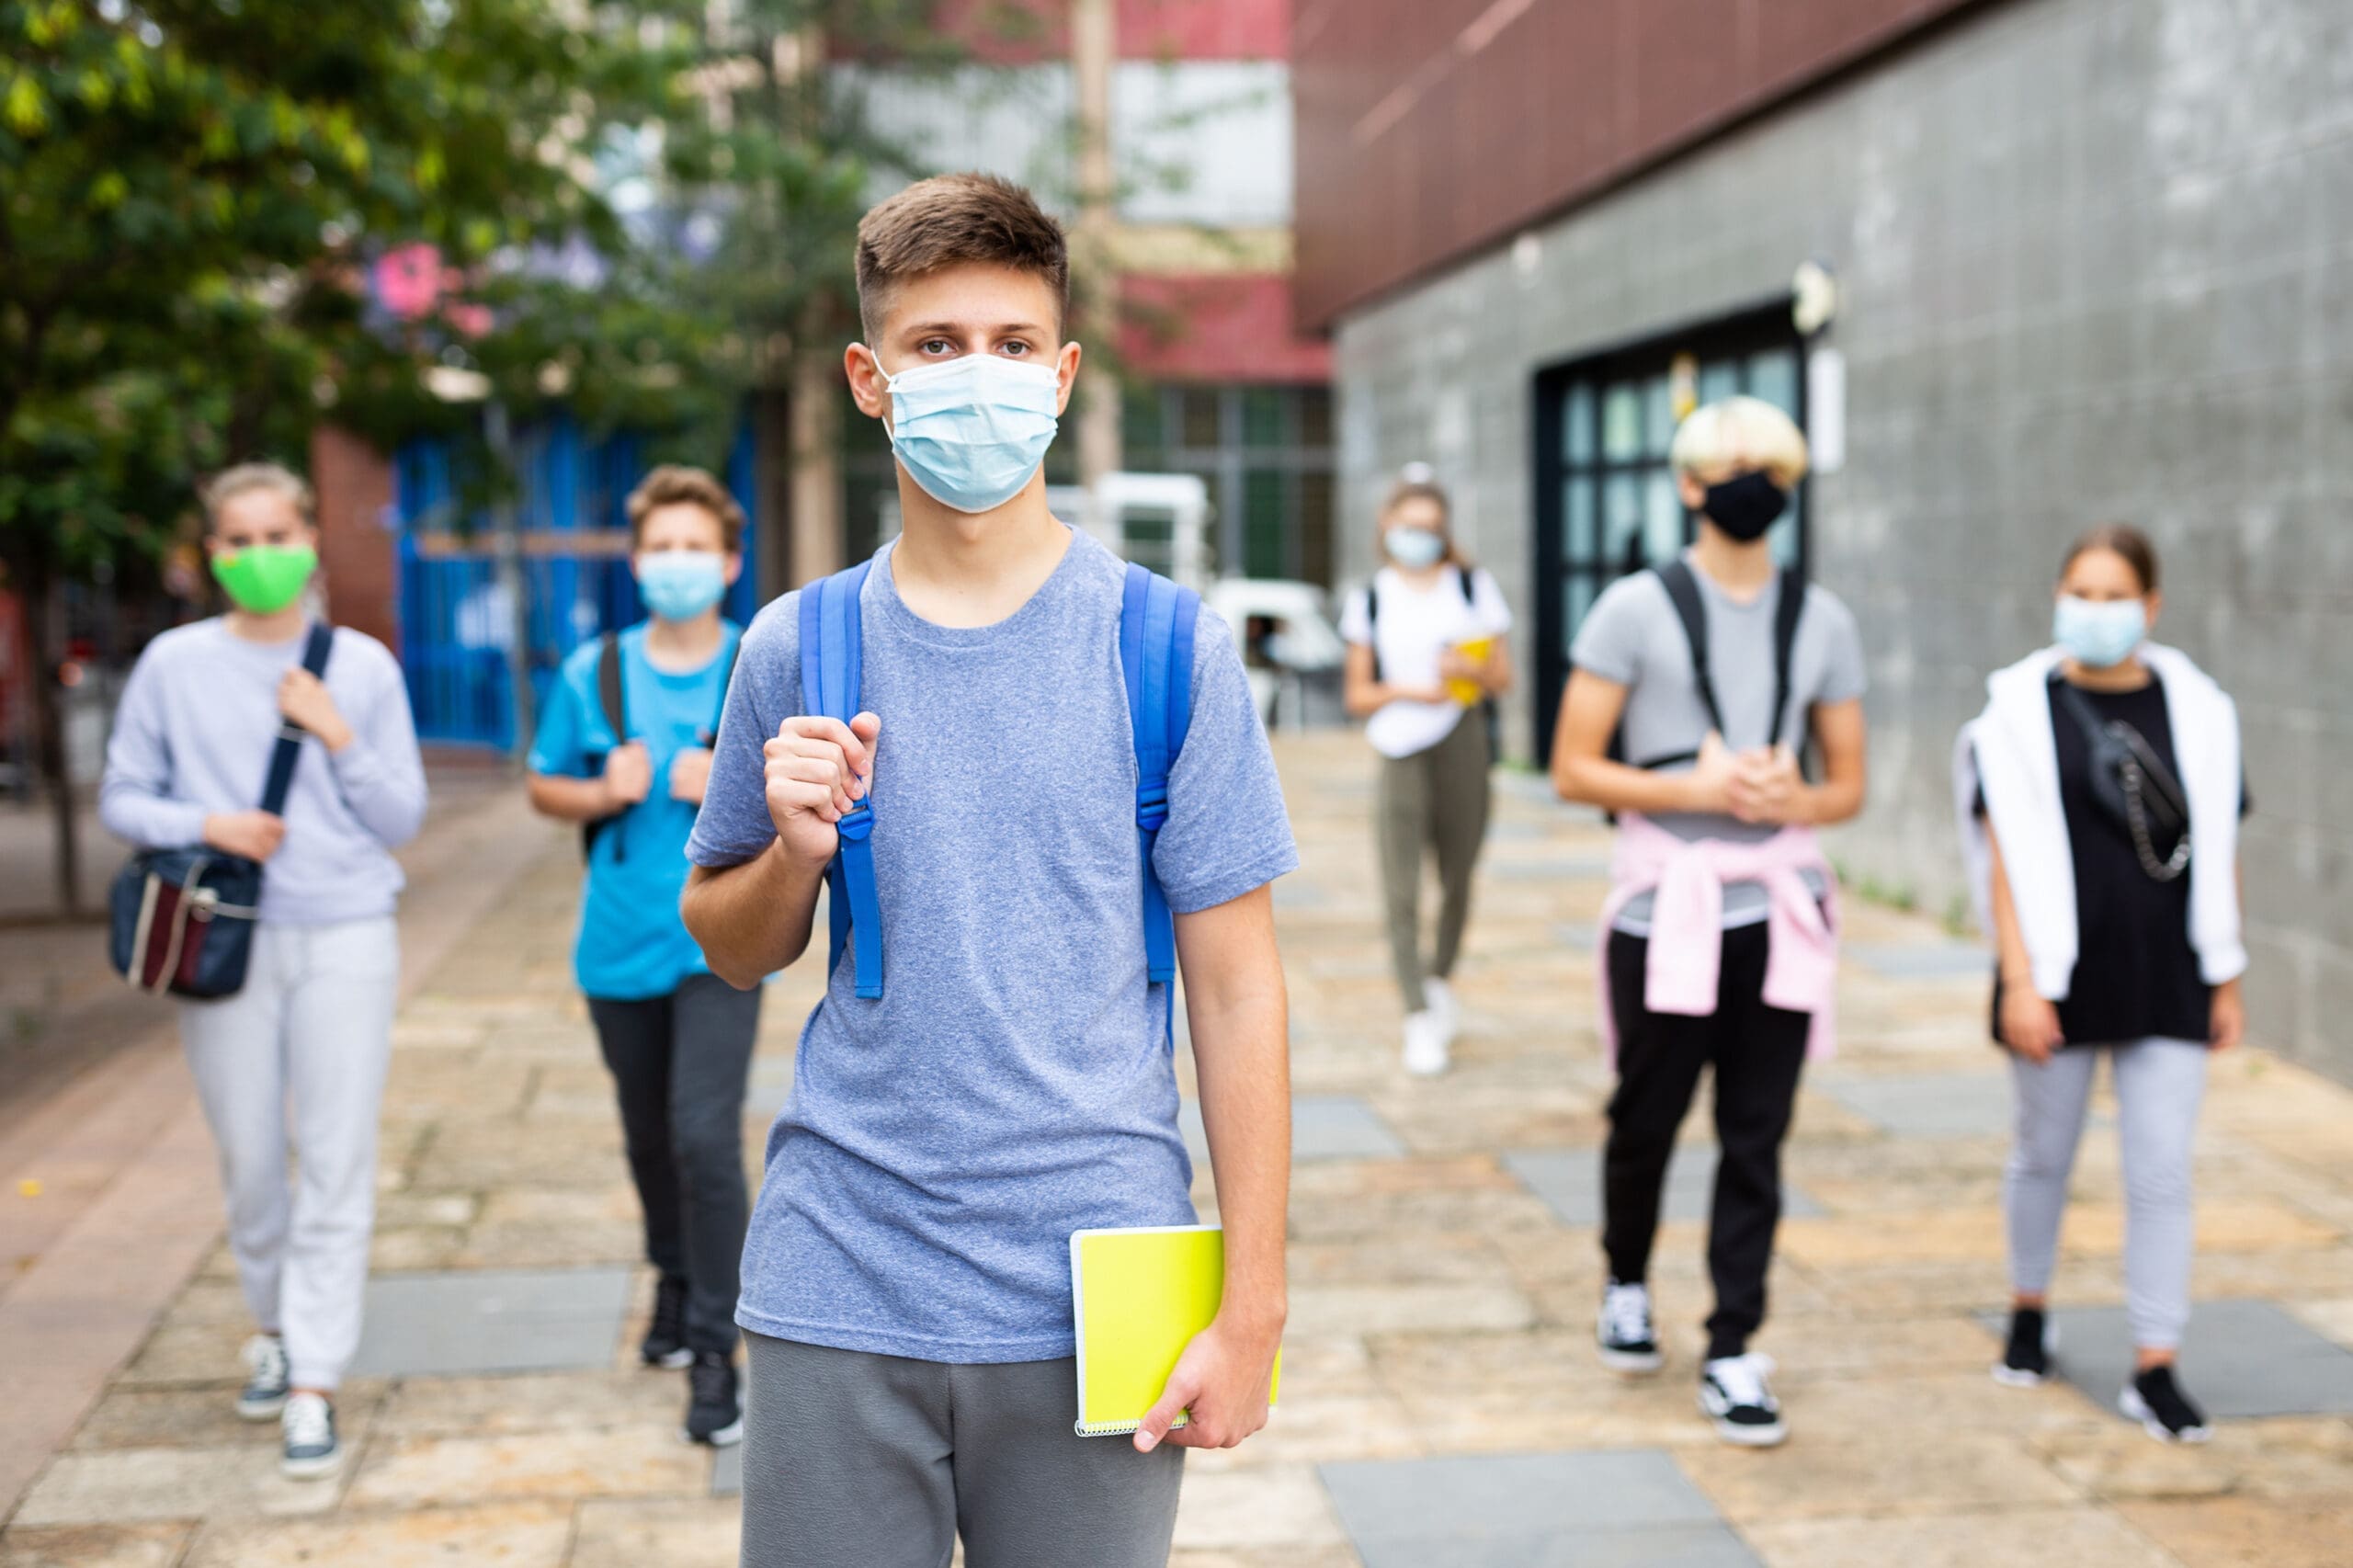 How Did Teenagers Fare in the Pandemic?